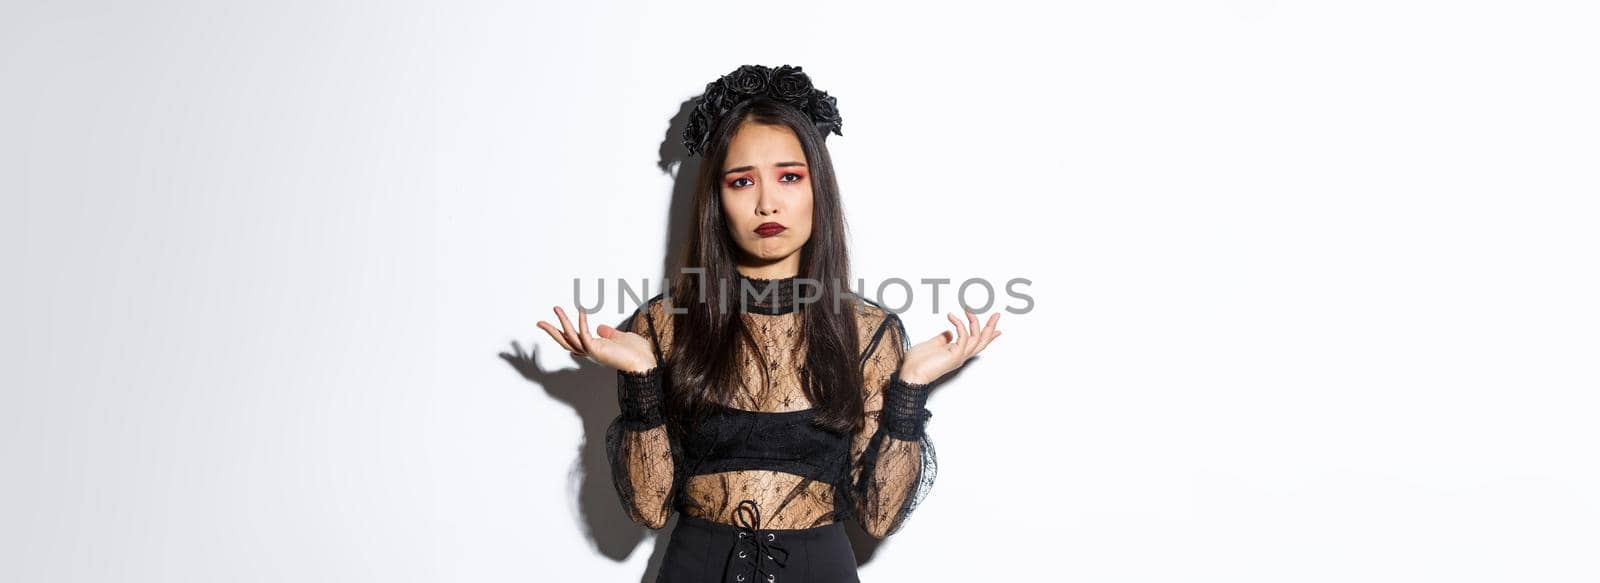 Clueless pensive asian girl in witch costume looking indecisive, shrugging with hands spread sideways, looking sad over white background.